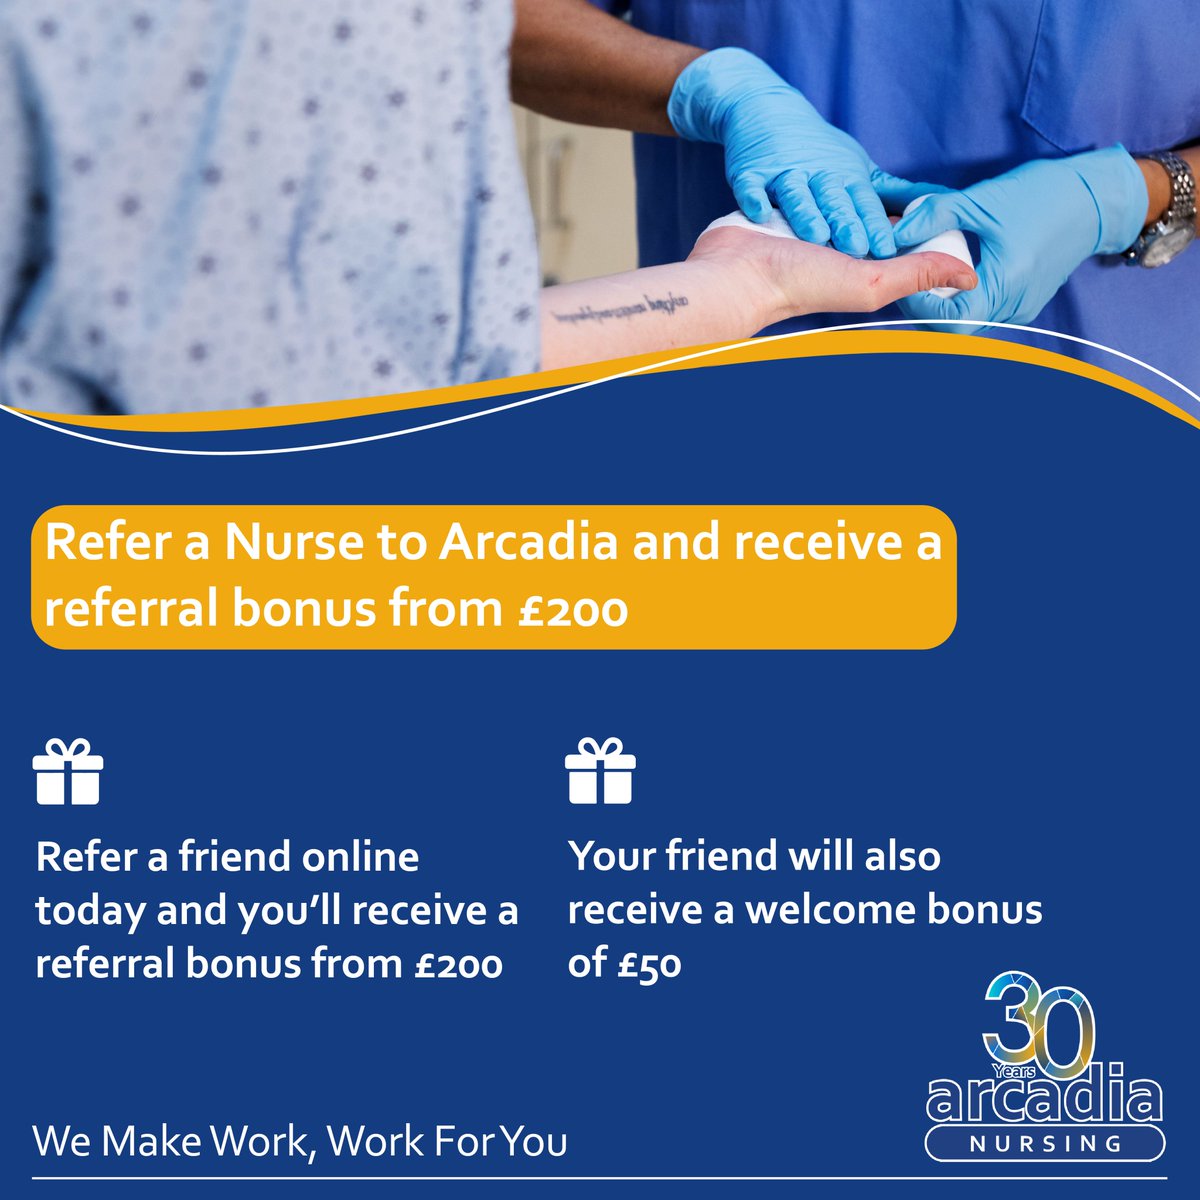 👩‍⚕️🏥Do you know a Nurse wanting to work with a Nursing Agency? Refer them to us! We are offering a Referral bonus from £200 and the new nurse will receive a welcome bonus of £50.

Refer your friend today
arcadianursing.co.uk/refer-a-friend

#referafriend #nursingroles #ApplyNow